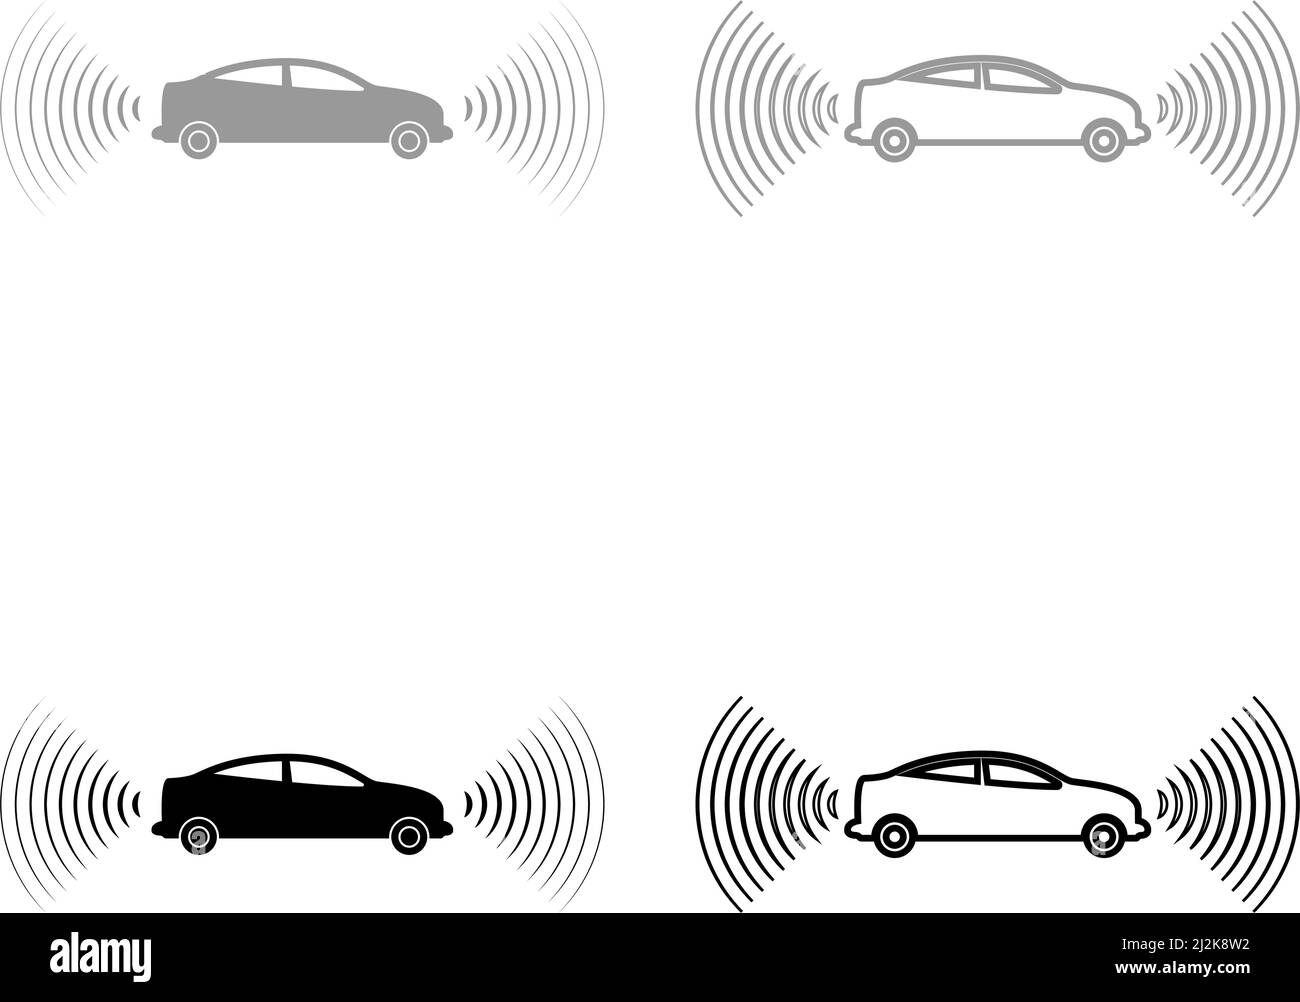 Car radio signals sensor smart technology autopilot front and back direction set icon grey black color vector illustration image simple solid fill Stock Vector